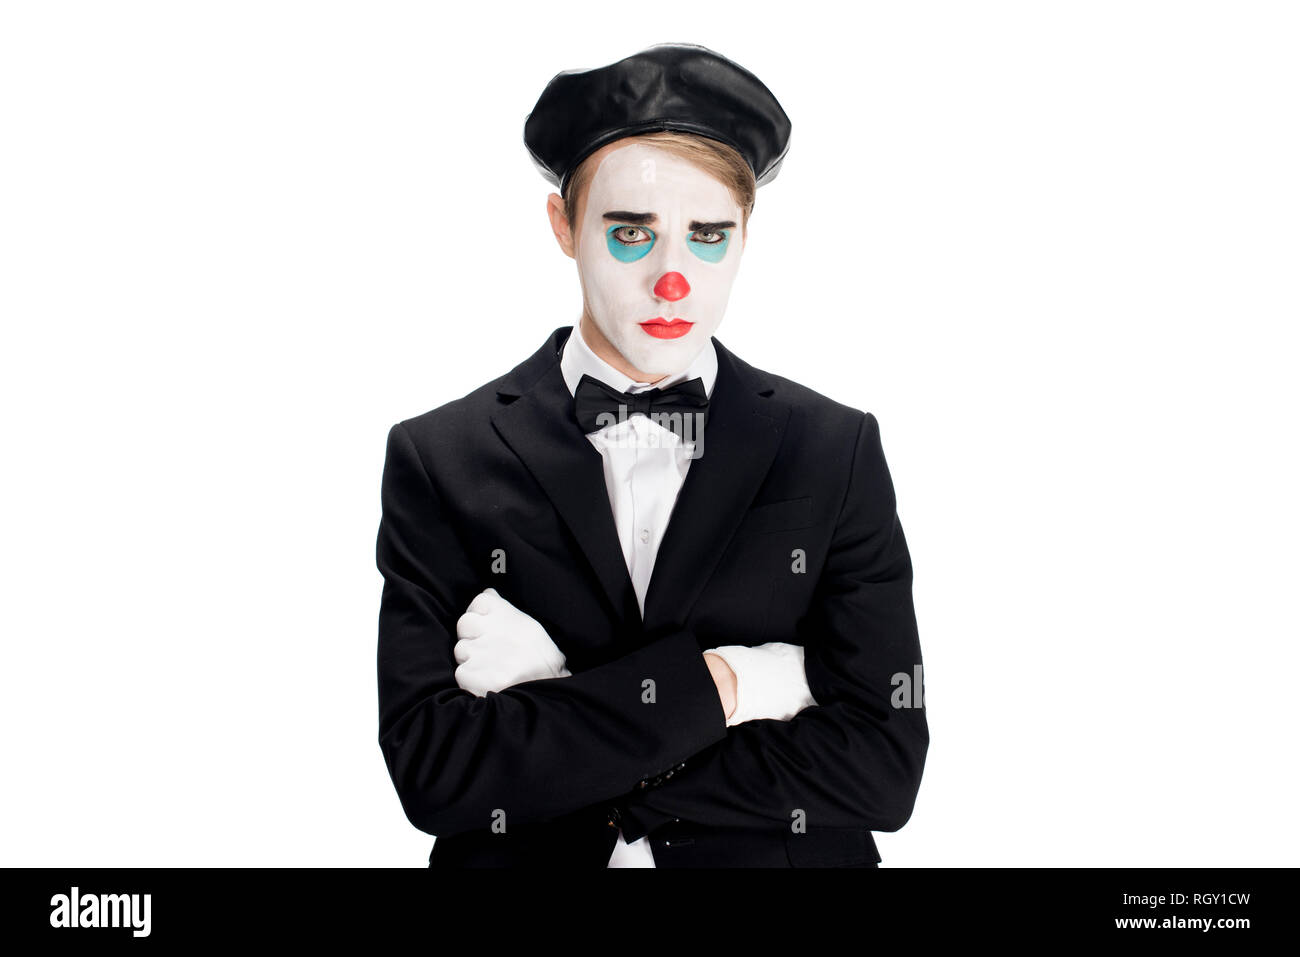 upset clown in suit and black beret standing with crossed arms isolated on white Stock Photo